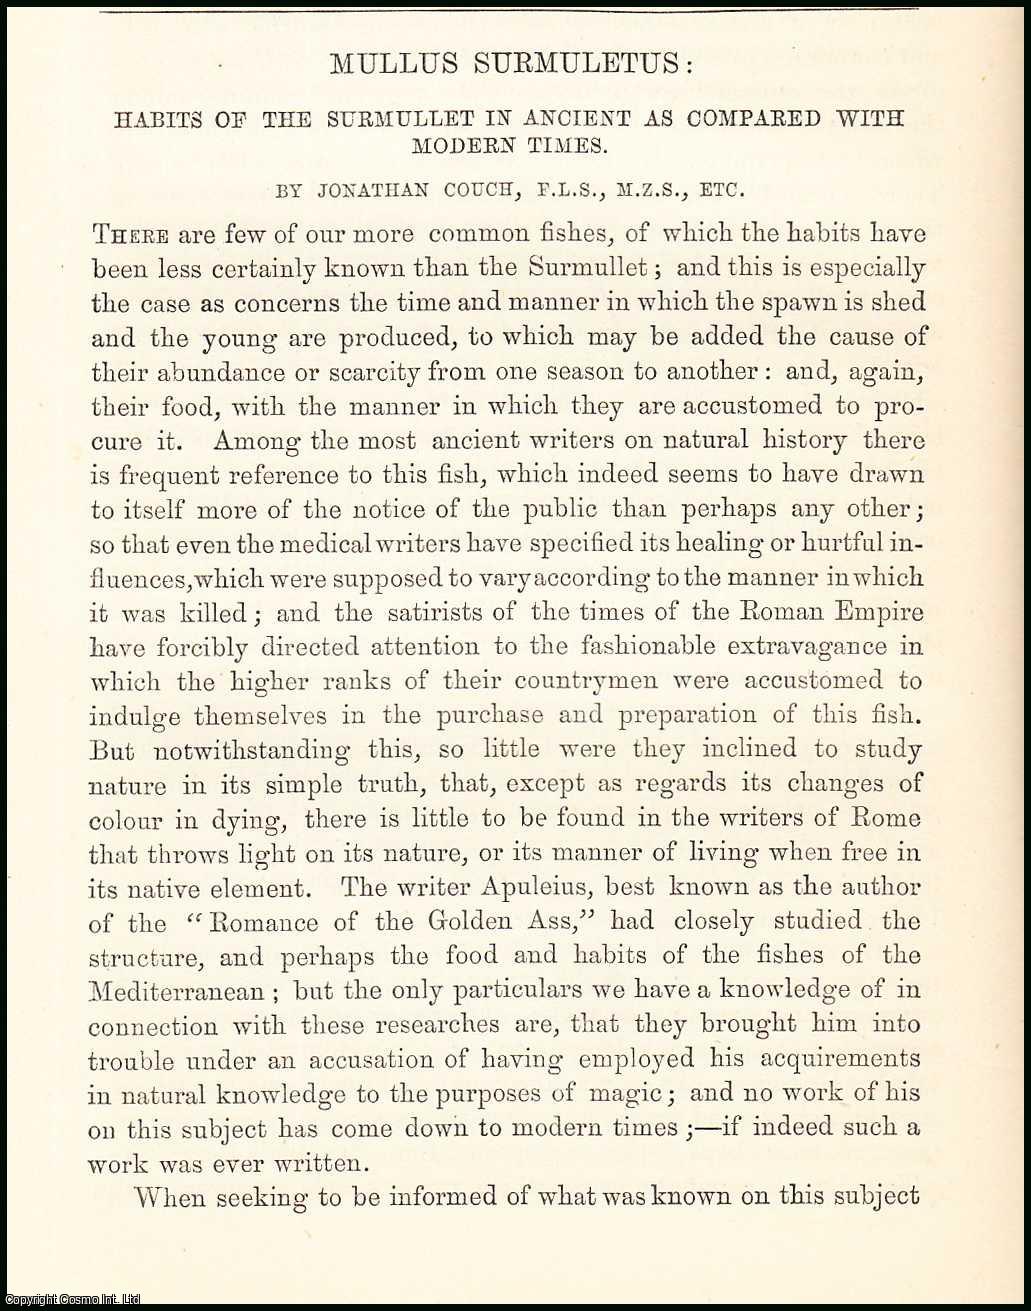 Jonathan Couch, F.L.S., C.M.Z.S., etc. - Mullus Surmuletus (common fish) : Habits of the Surmullet in Ancient as compared with Modern Times. An uncommon original article from the Student and Intellectual Observer of Science Literature & Art, 1869.